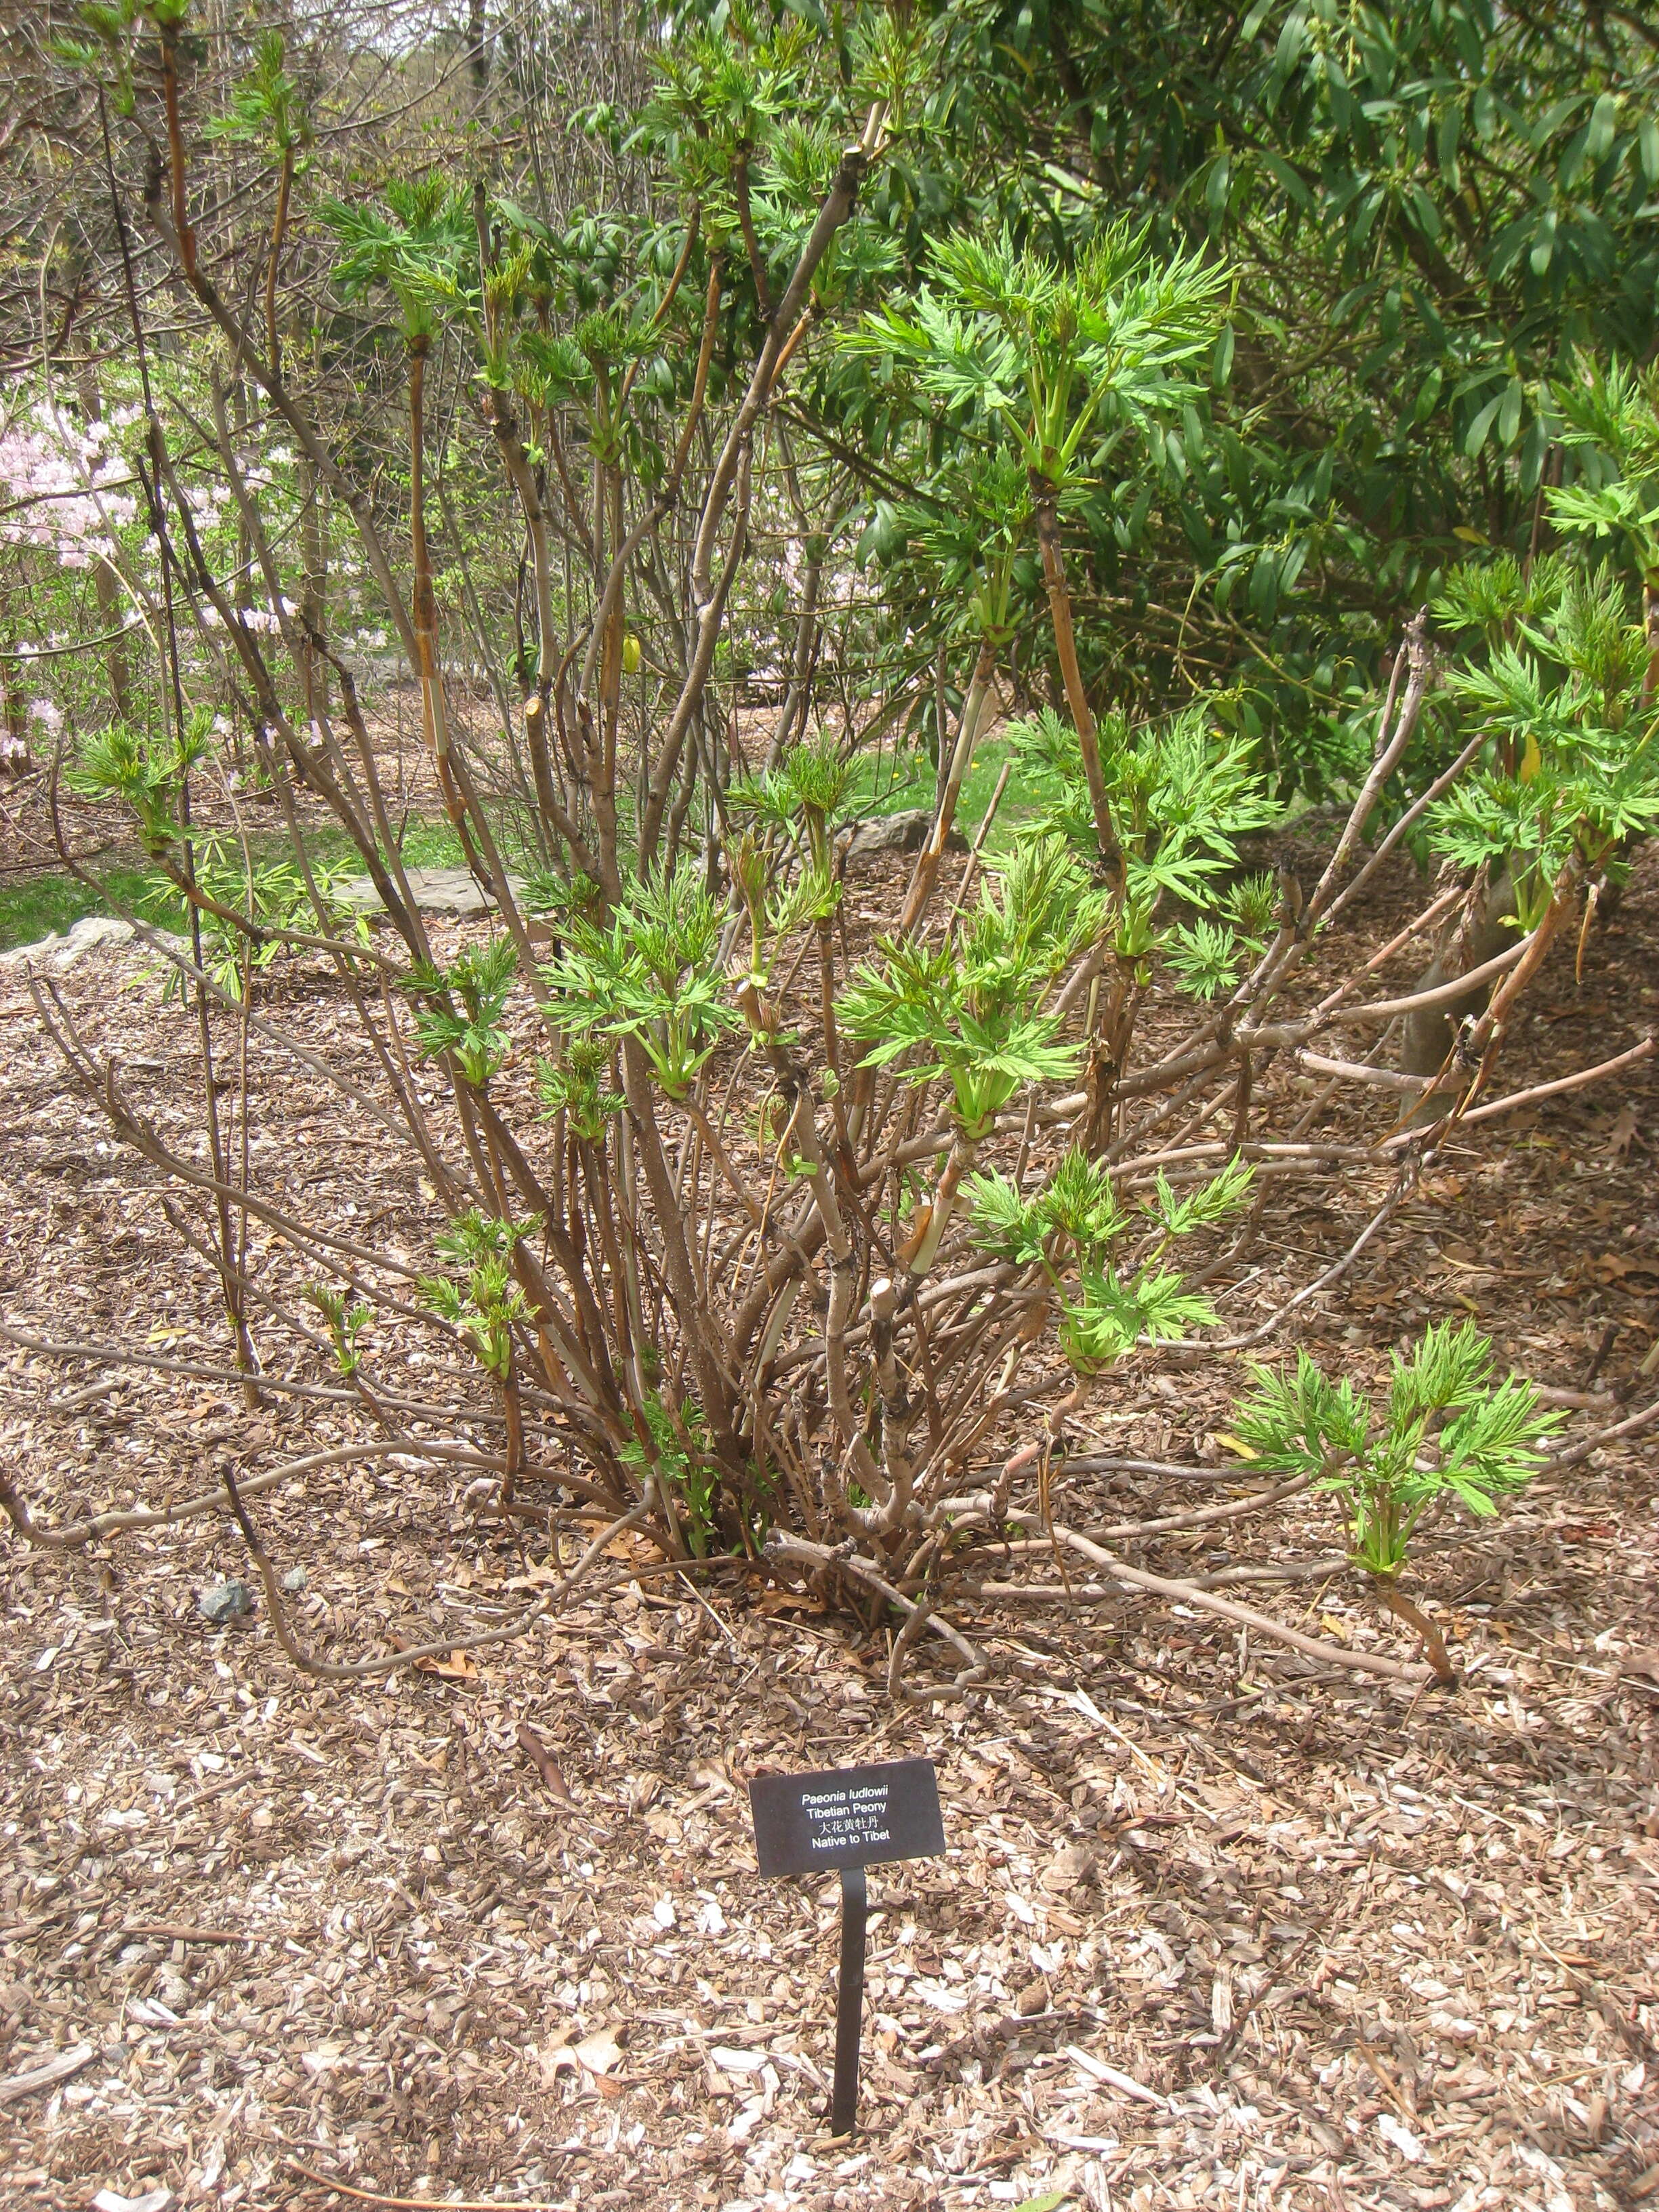 Image of Paeonia delavayi subsp. ludlowii (Stern & G. Taylor) B. A. Shen